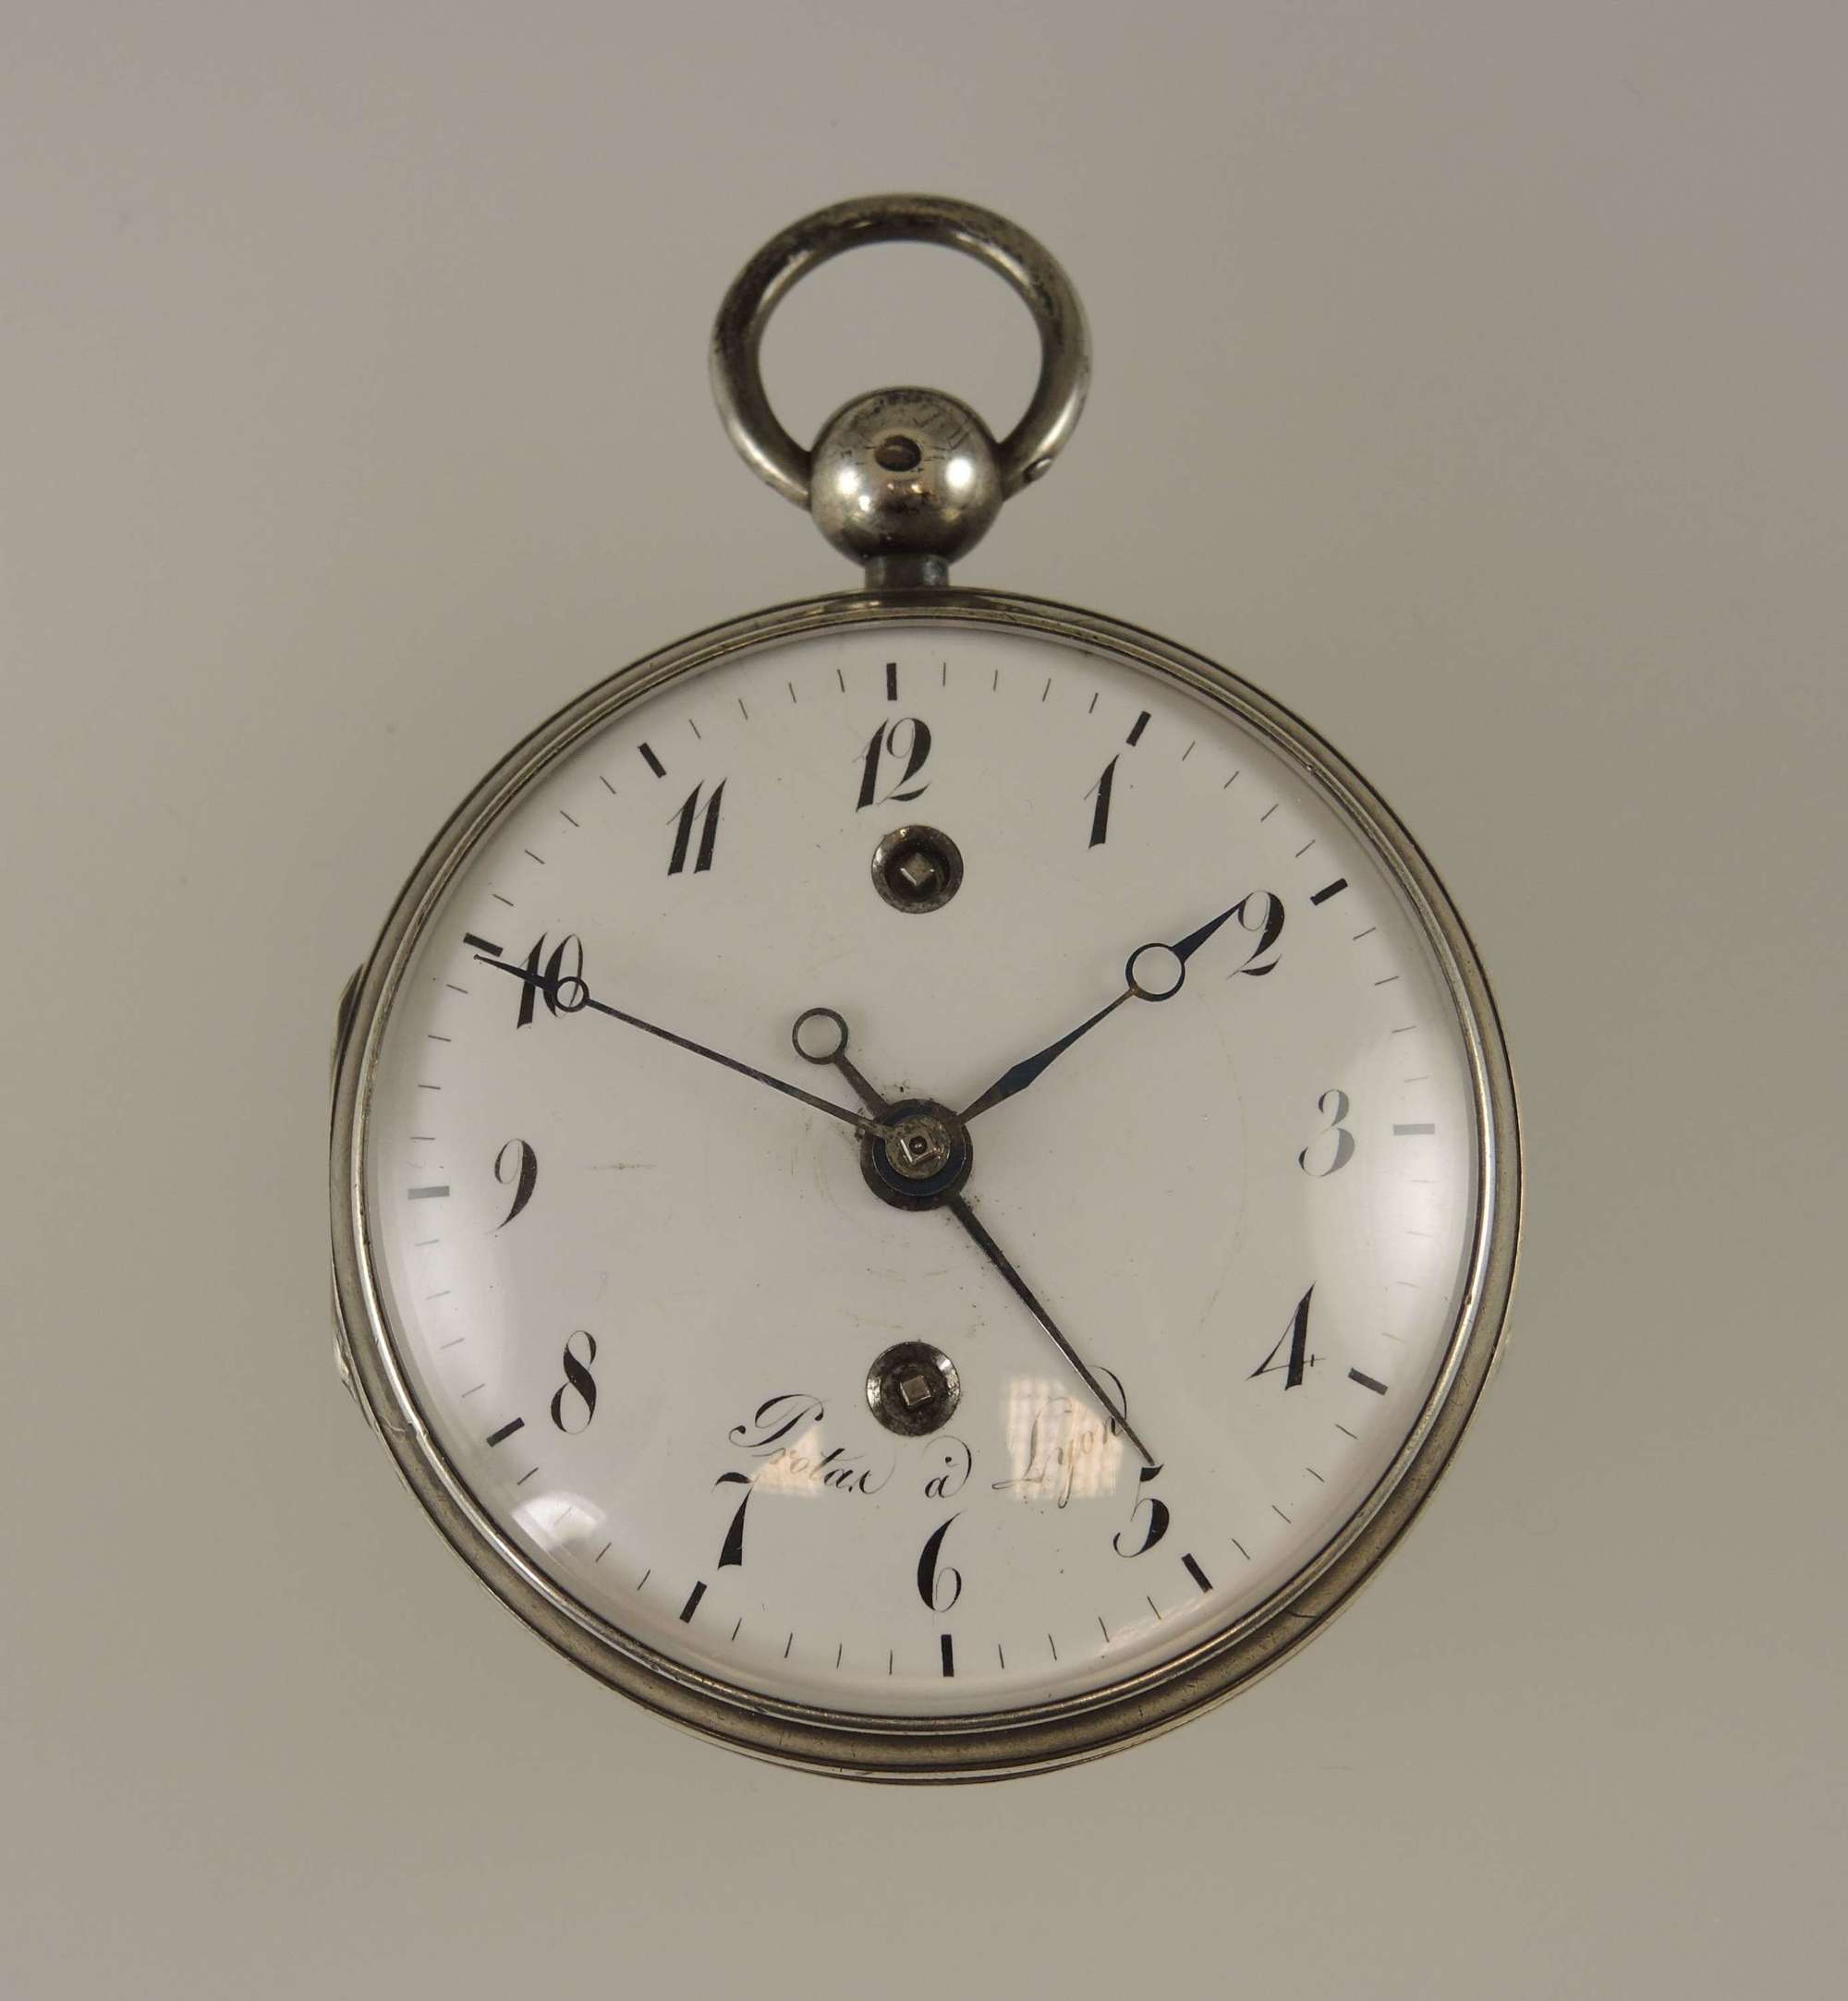 Silver French verge with alarm function by Protas Lyon c1810